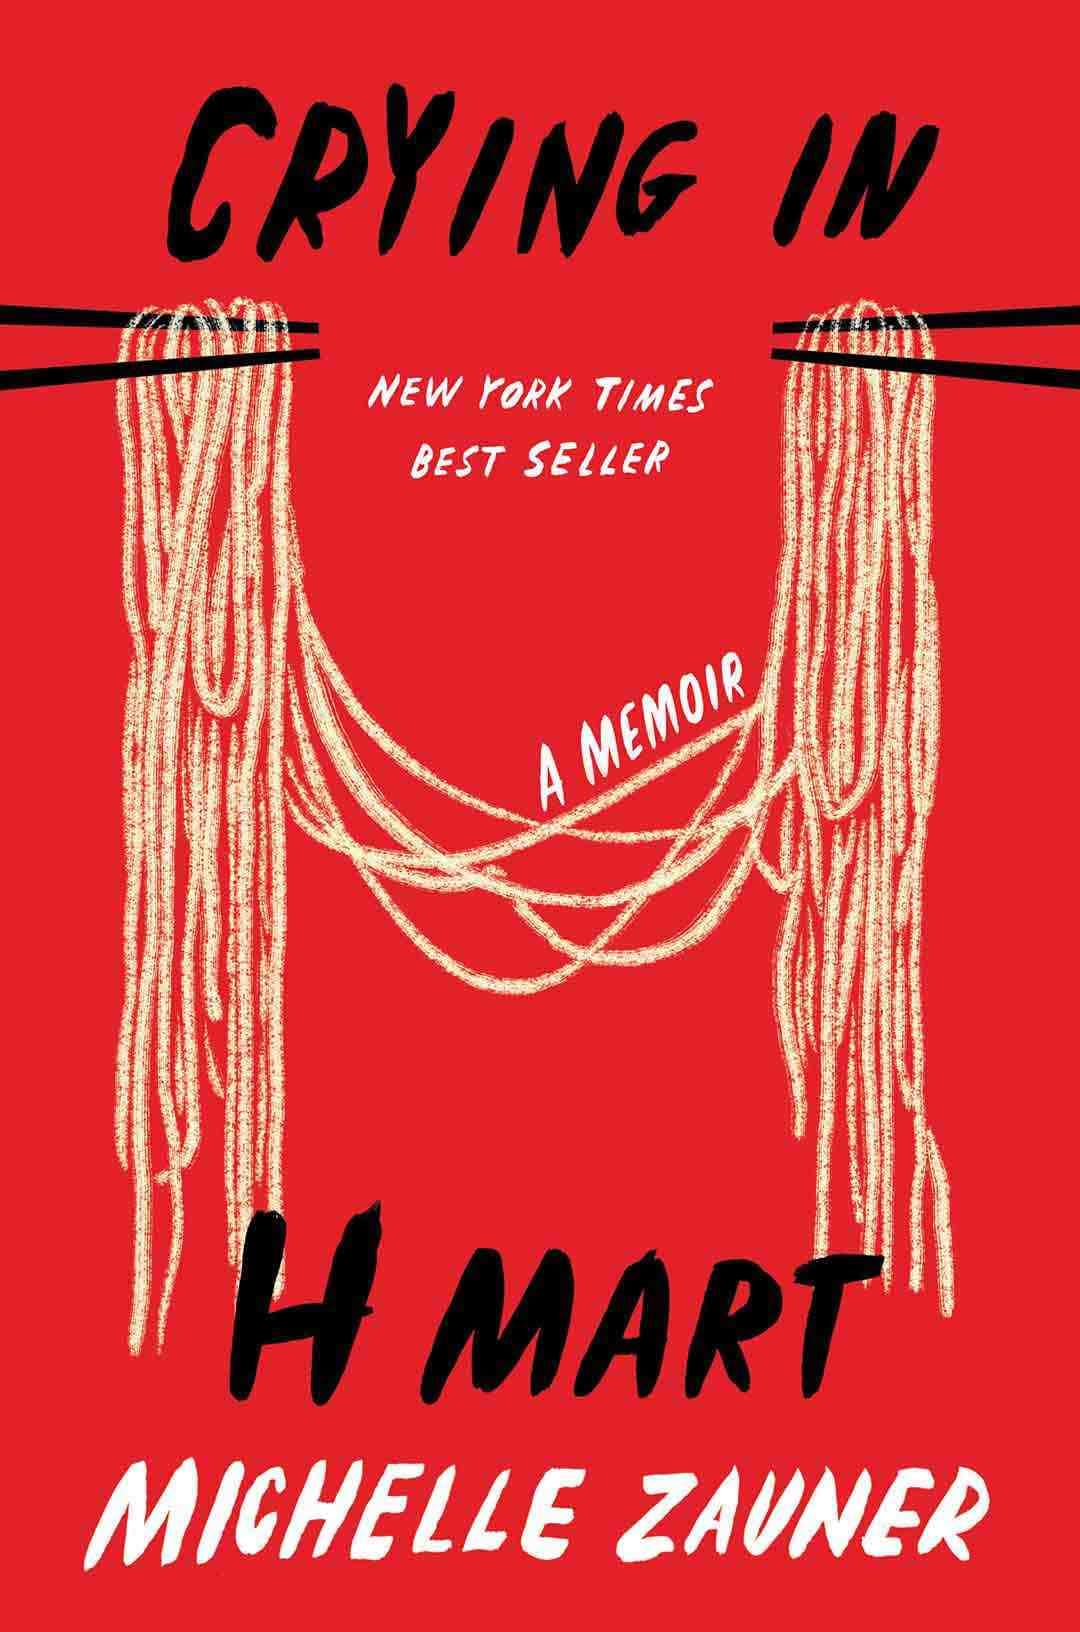 “Crying in H Mart: A Memoir” by Michelle Zauner book cover